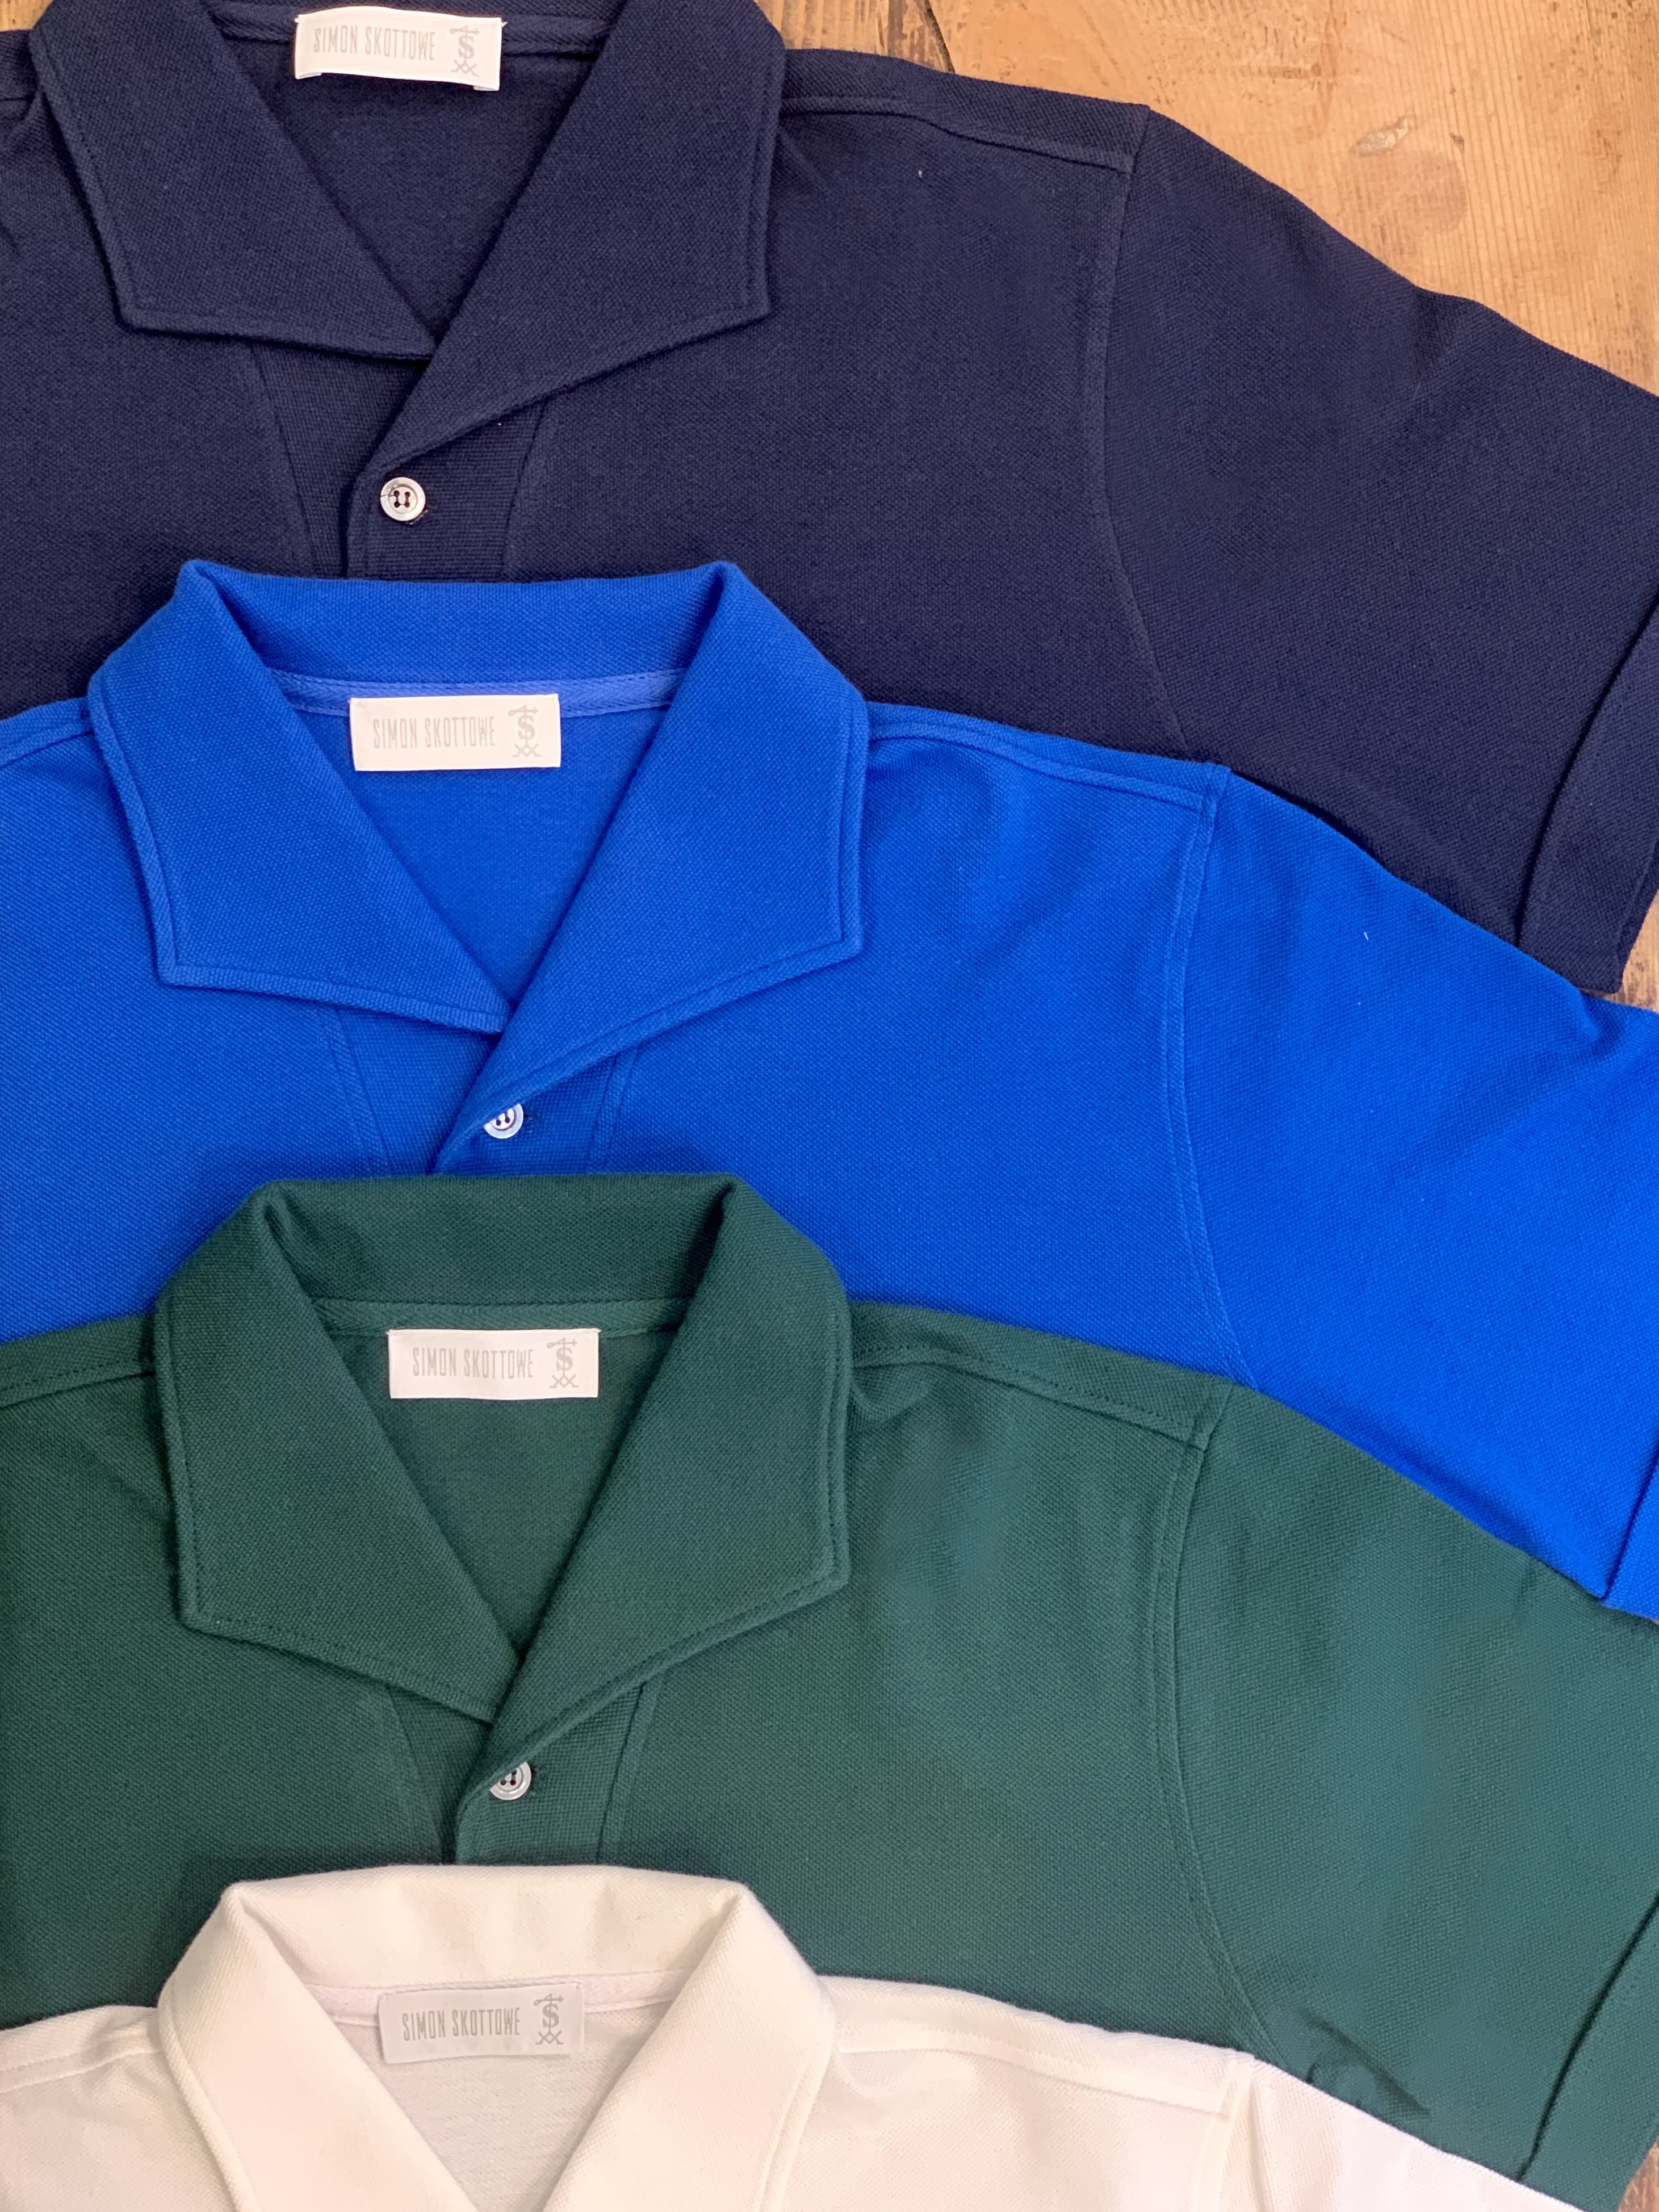 The story of polo shirt